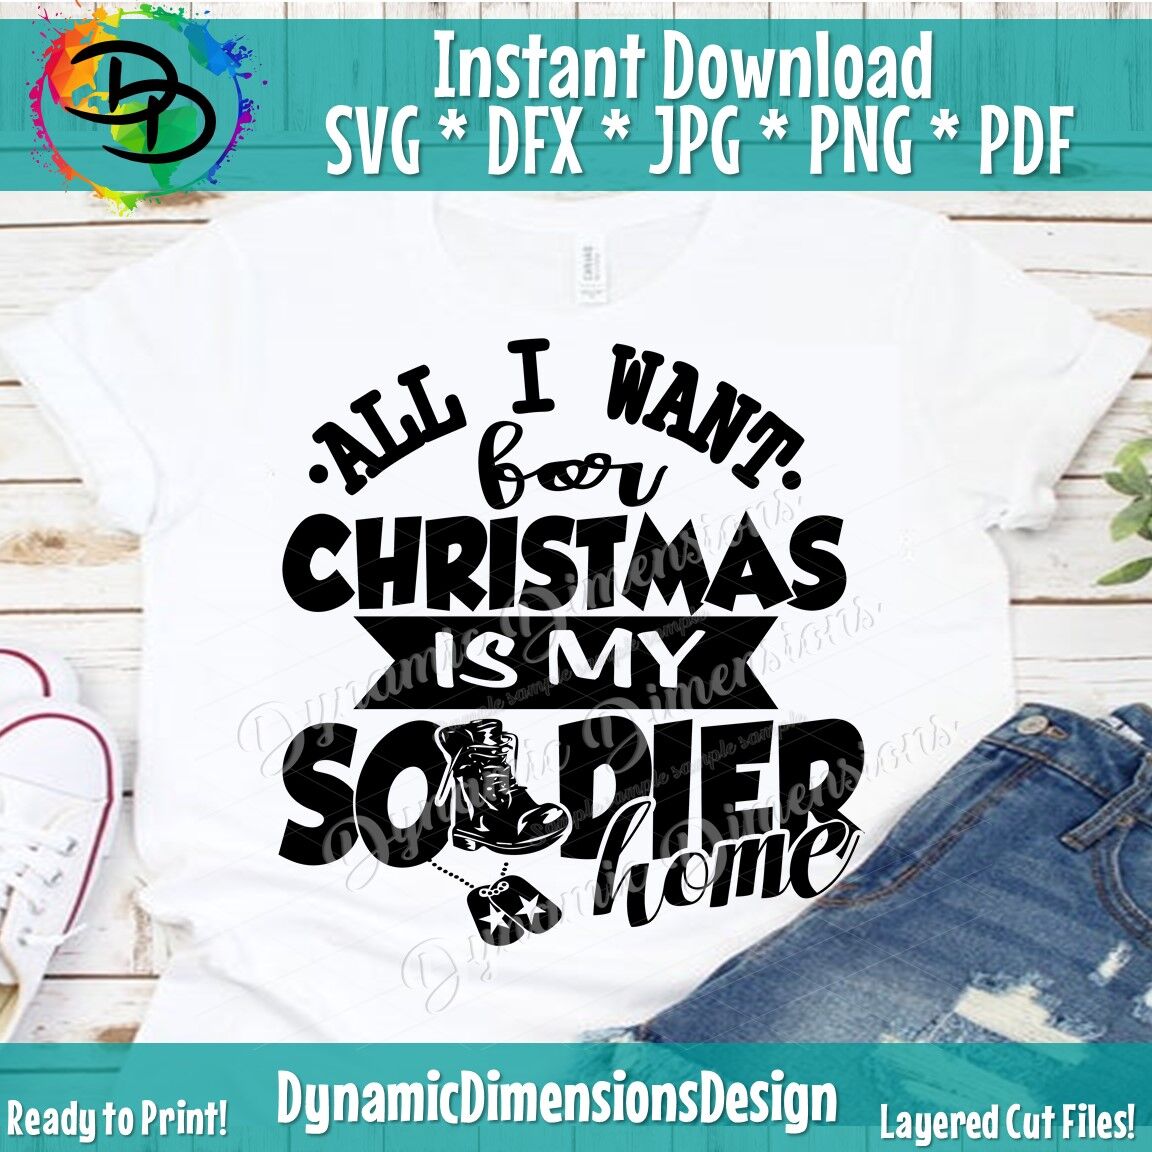 Soldier svg, All i want for christmas, Love Soldier SVG, png, Cut File